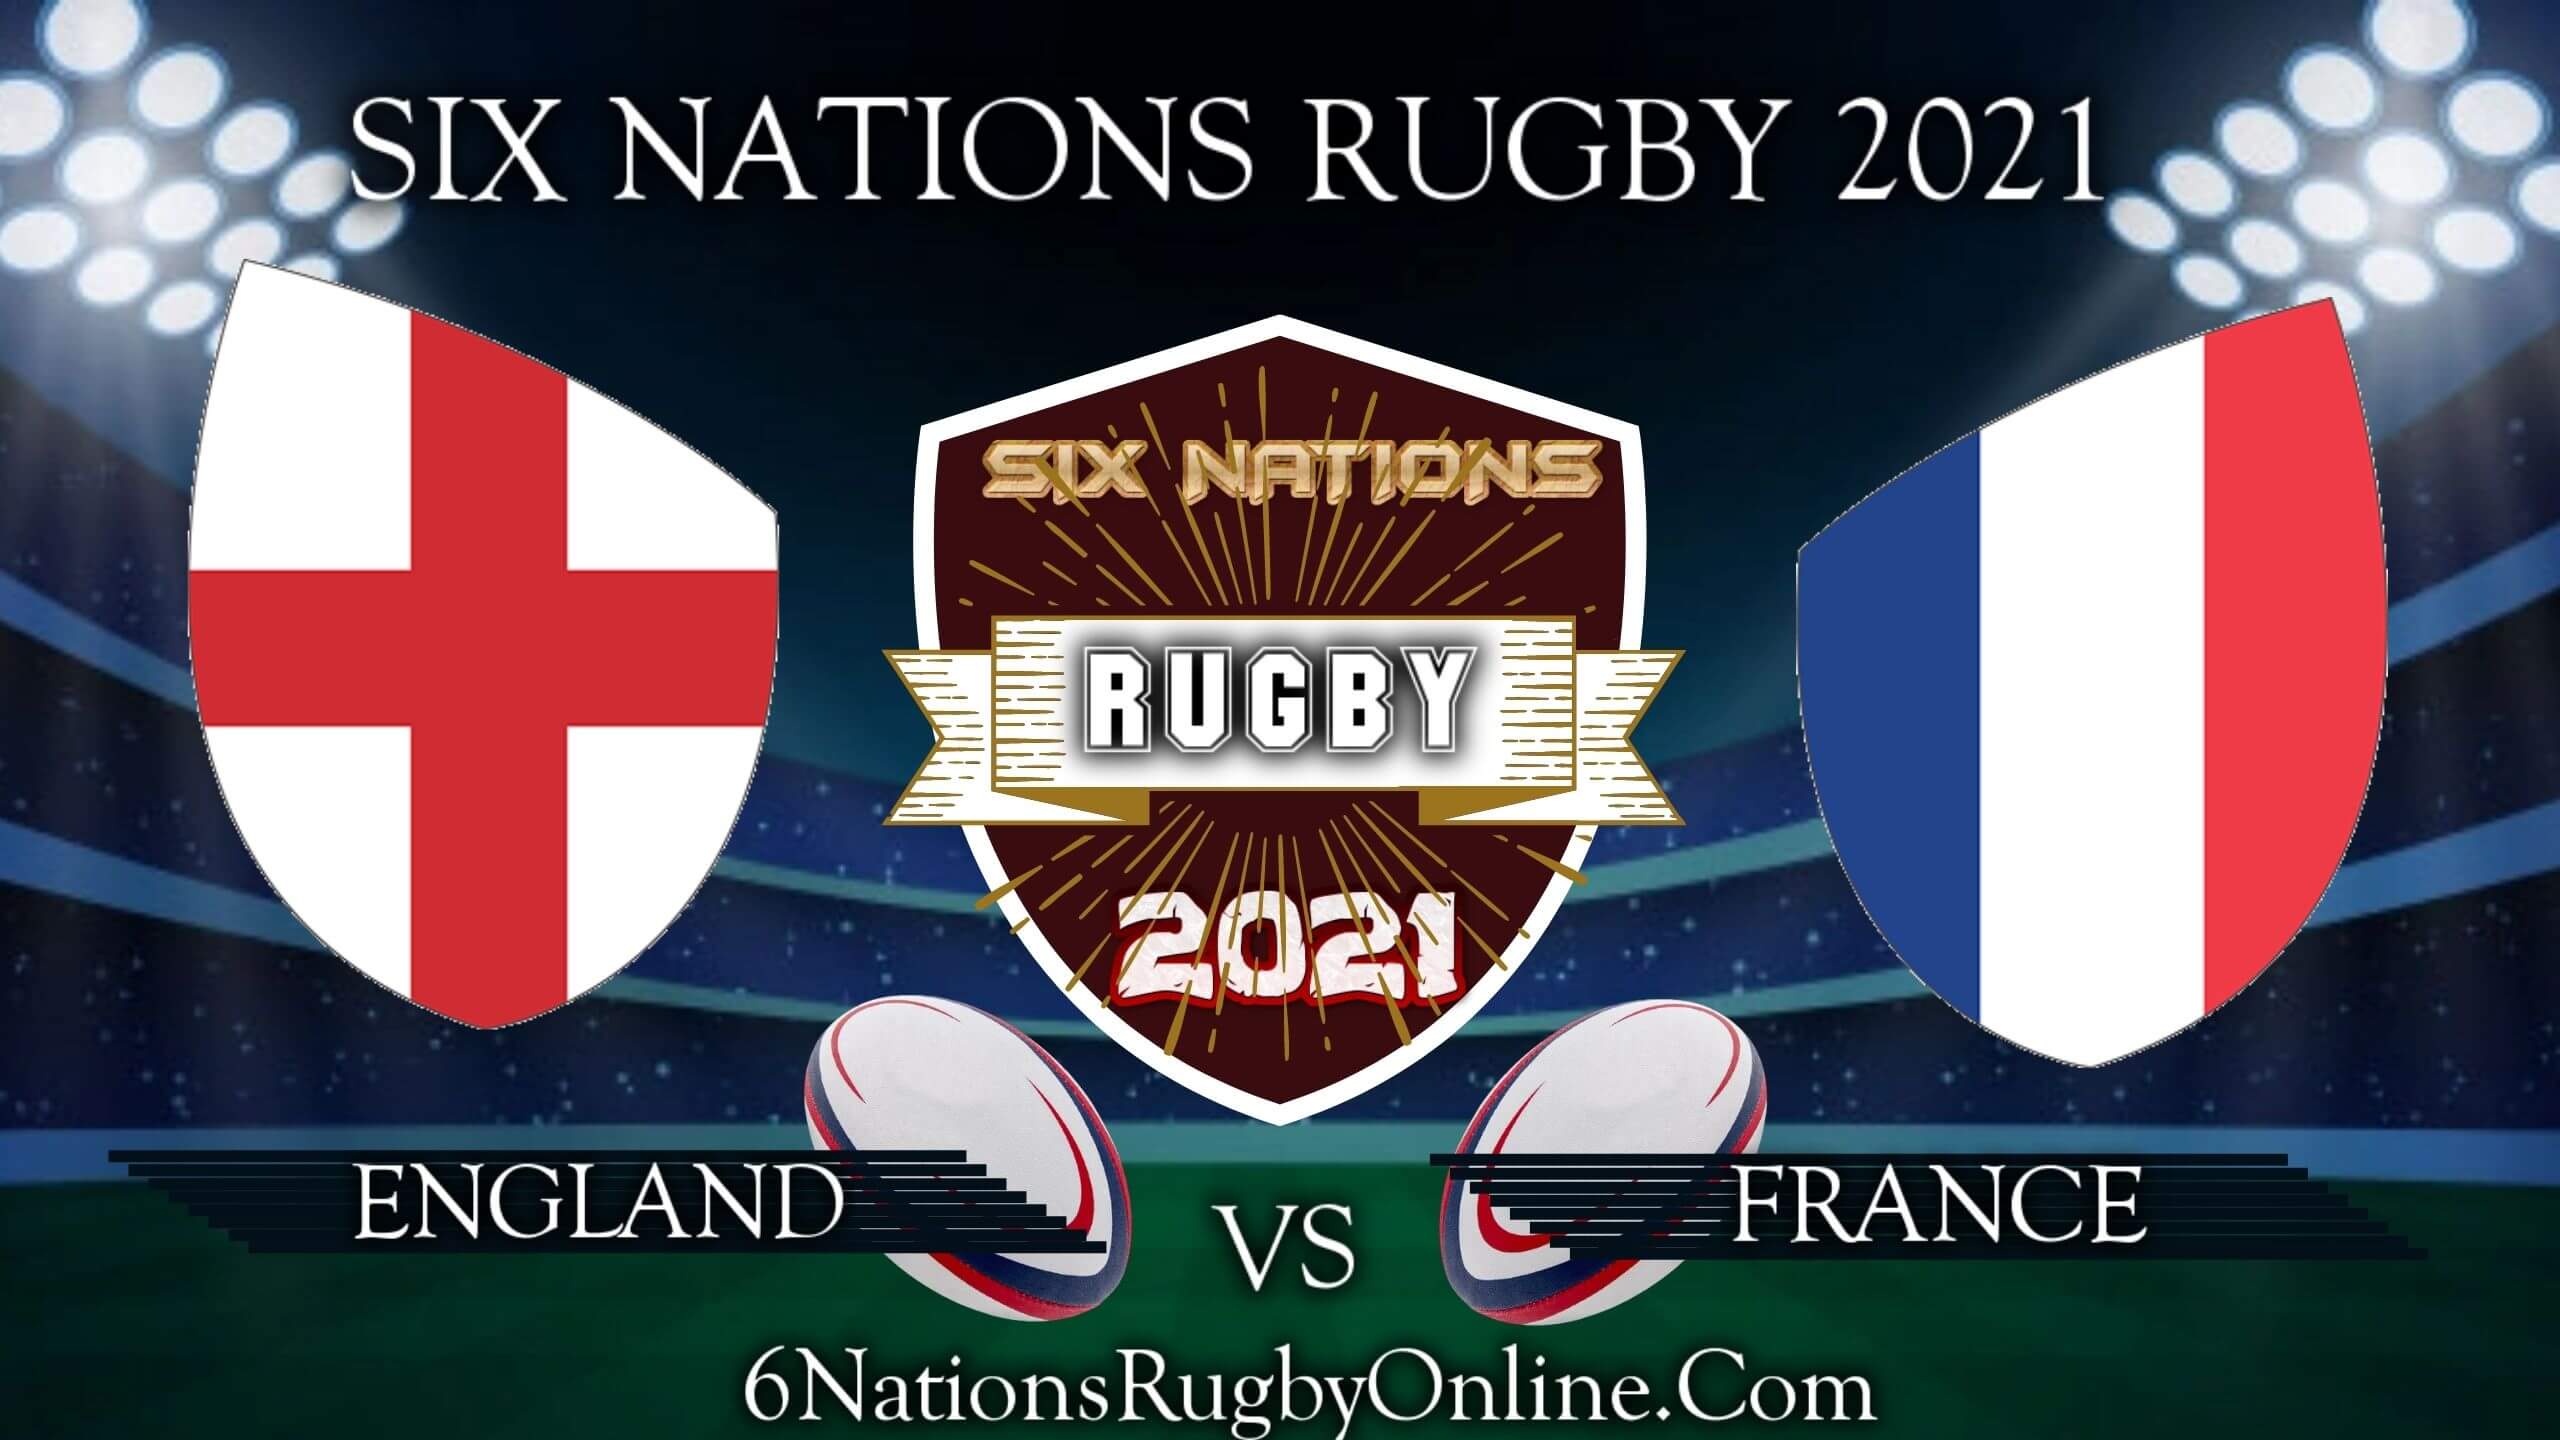 England vs France Rd 4 Result 2021 | Six Nations Rugby